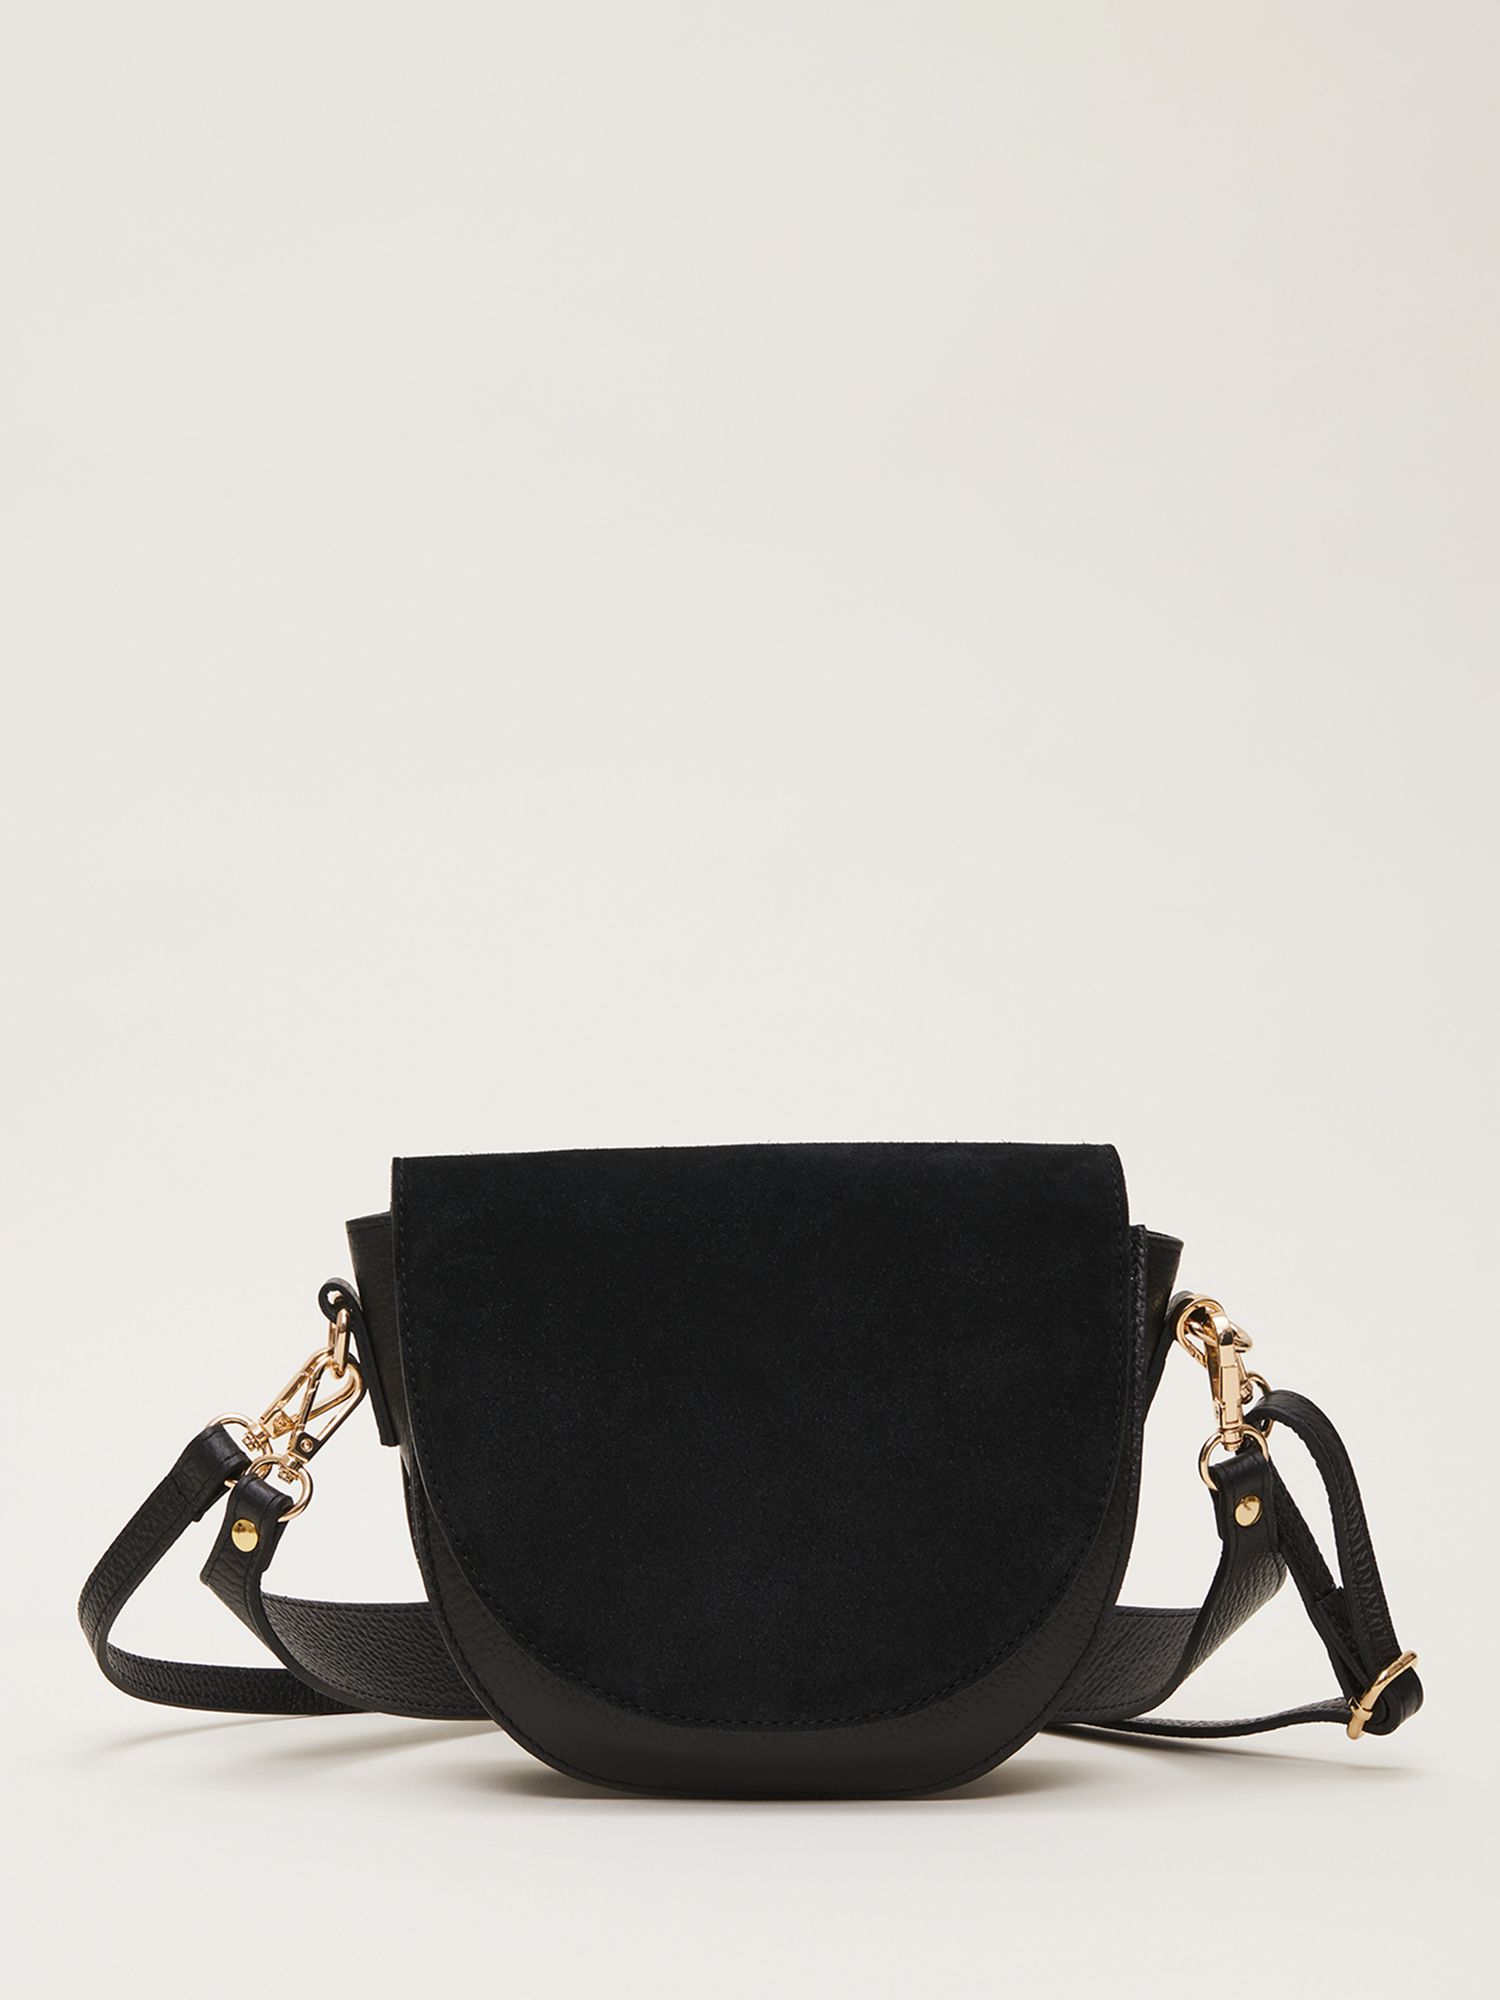 Phase Eight Suede Cross Body Bag, Black at John Lewis & Partners